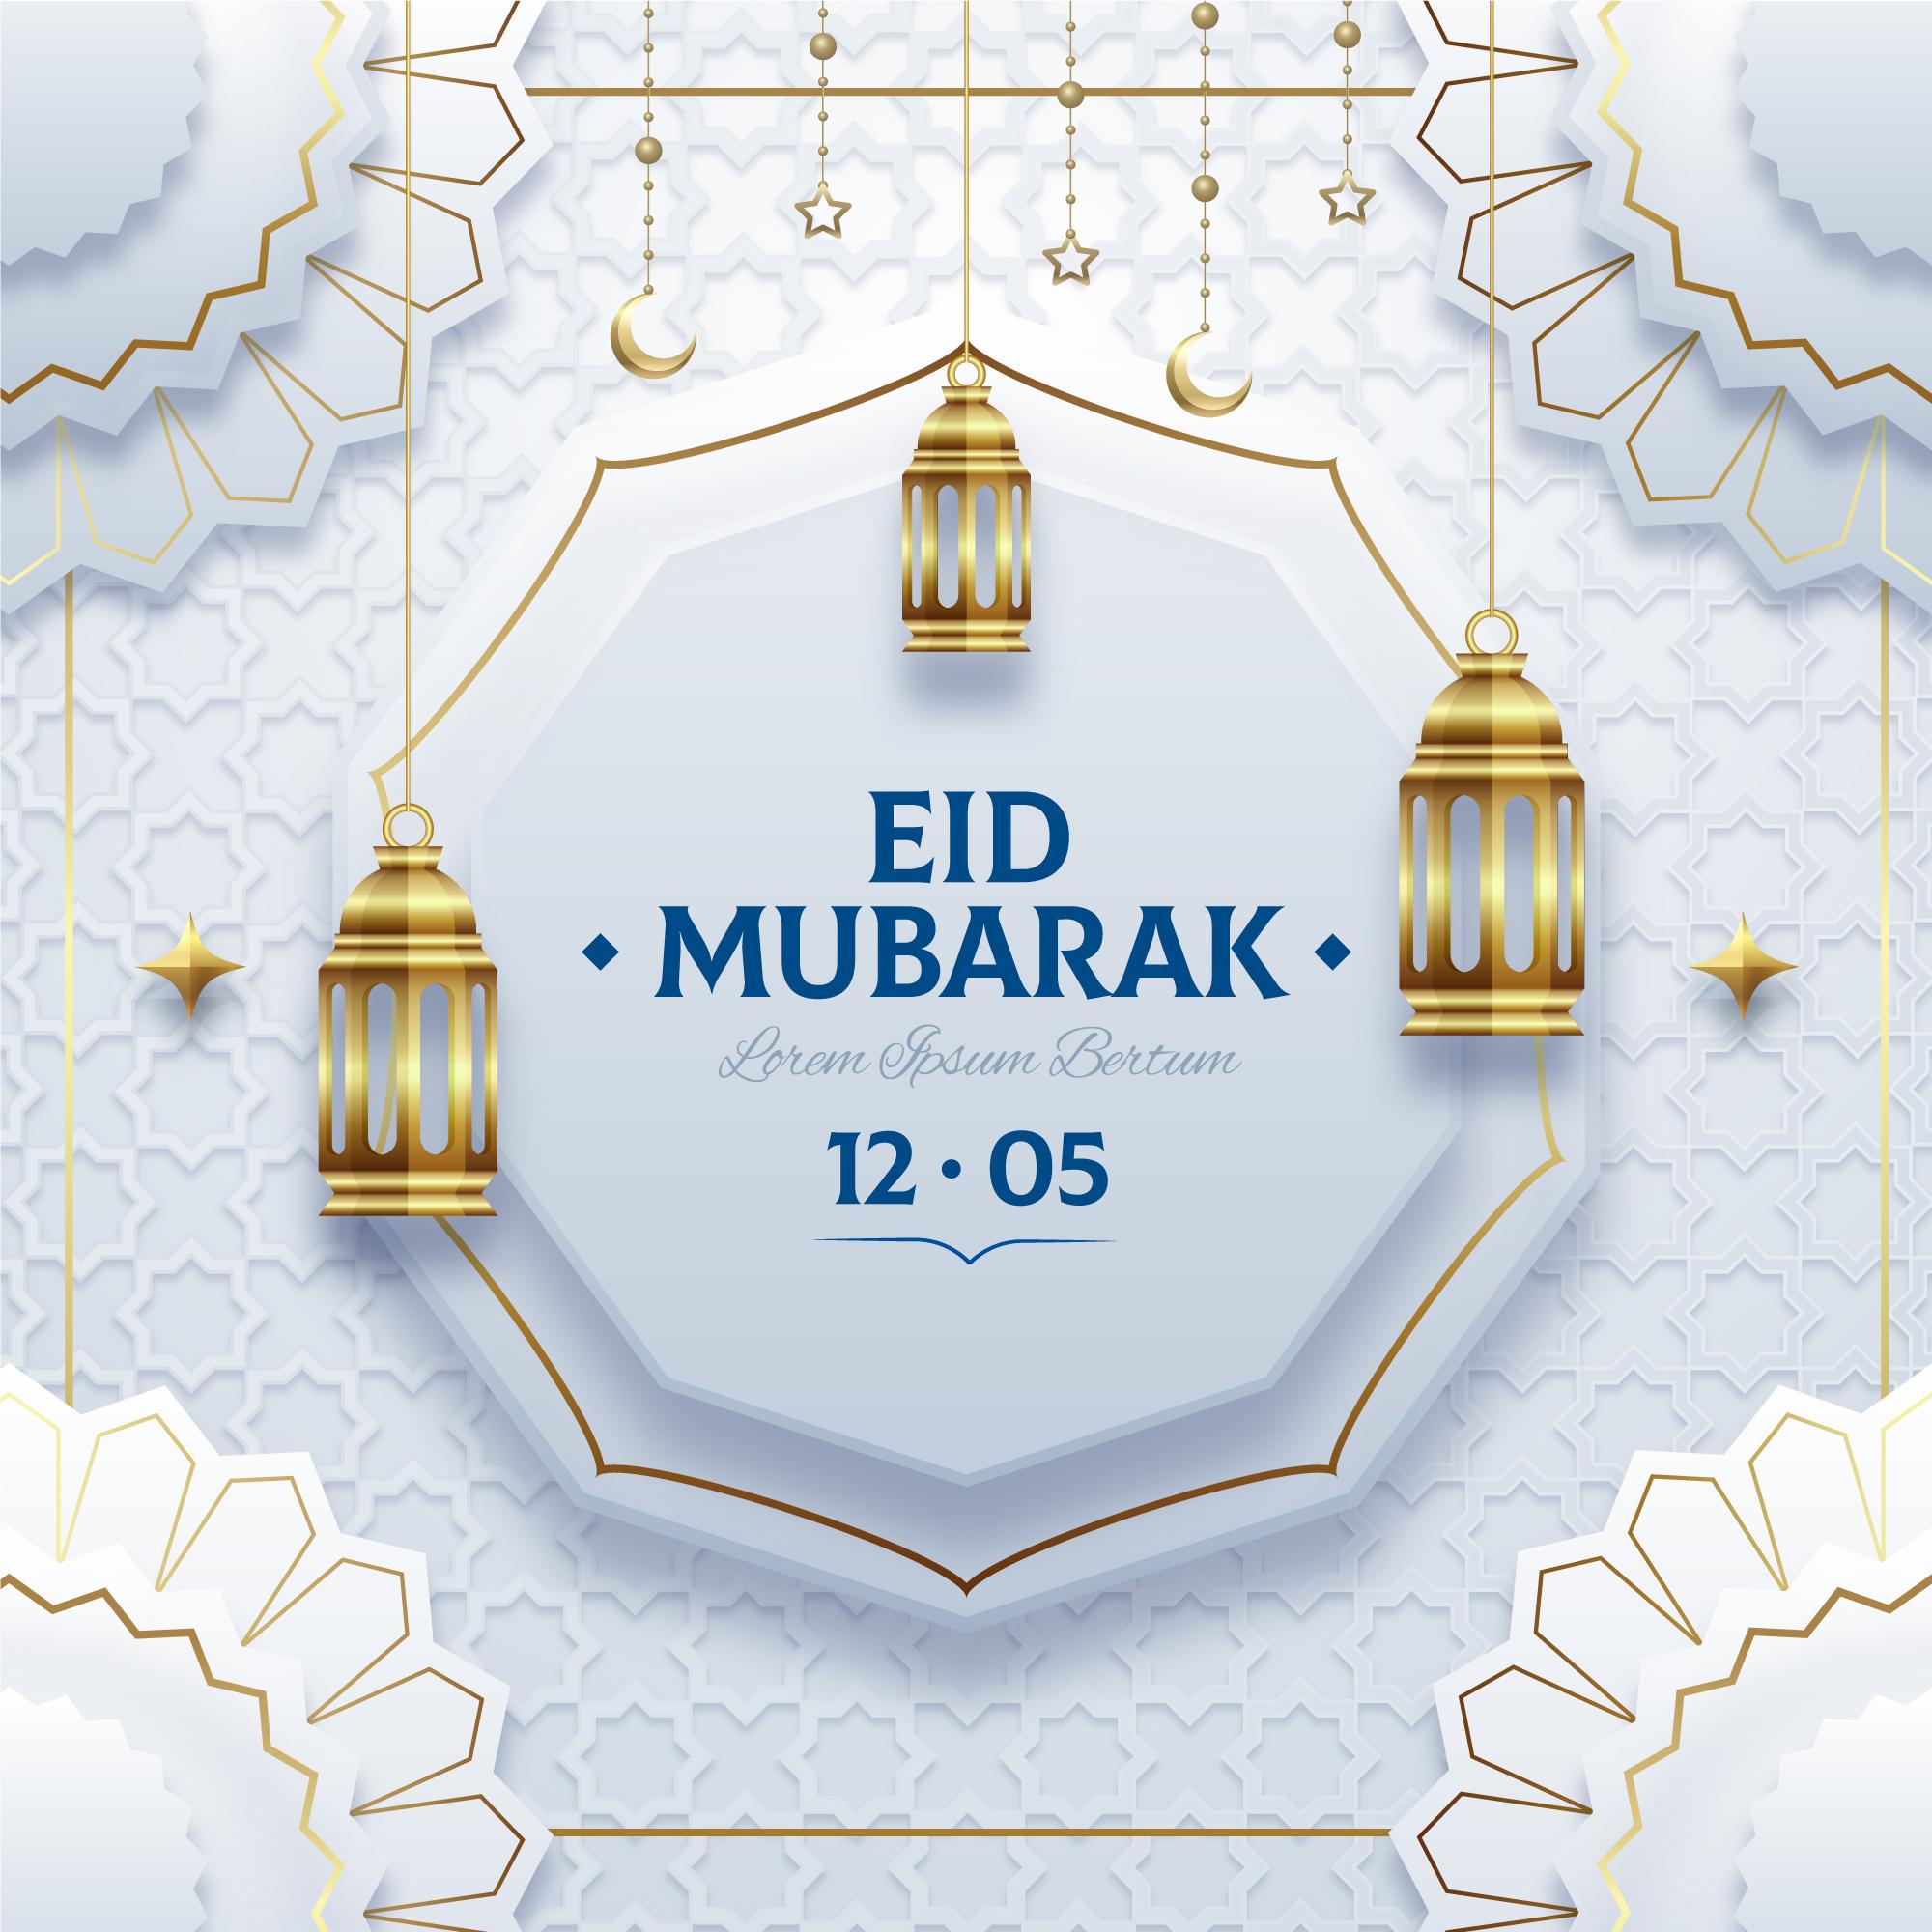 Advance Eid Greetings Pictures 2022 - Eid-ul-Fitr 2022 Pictures